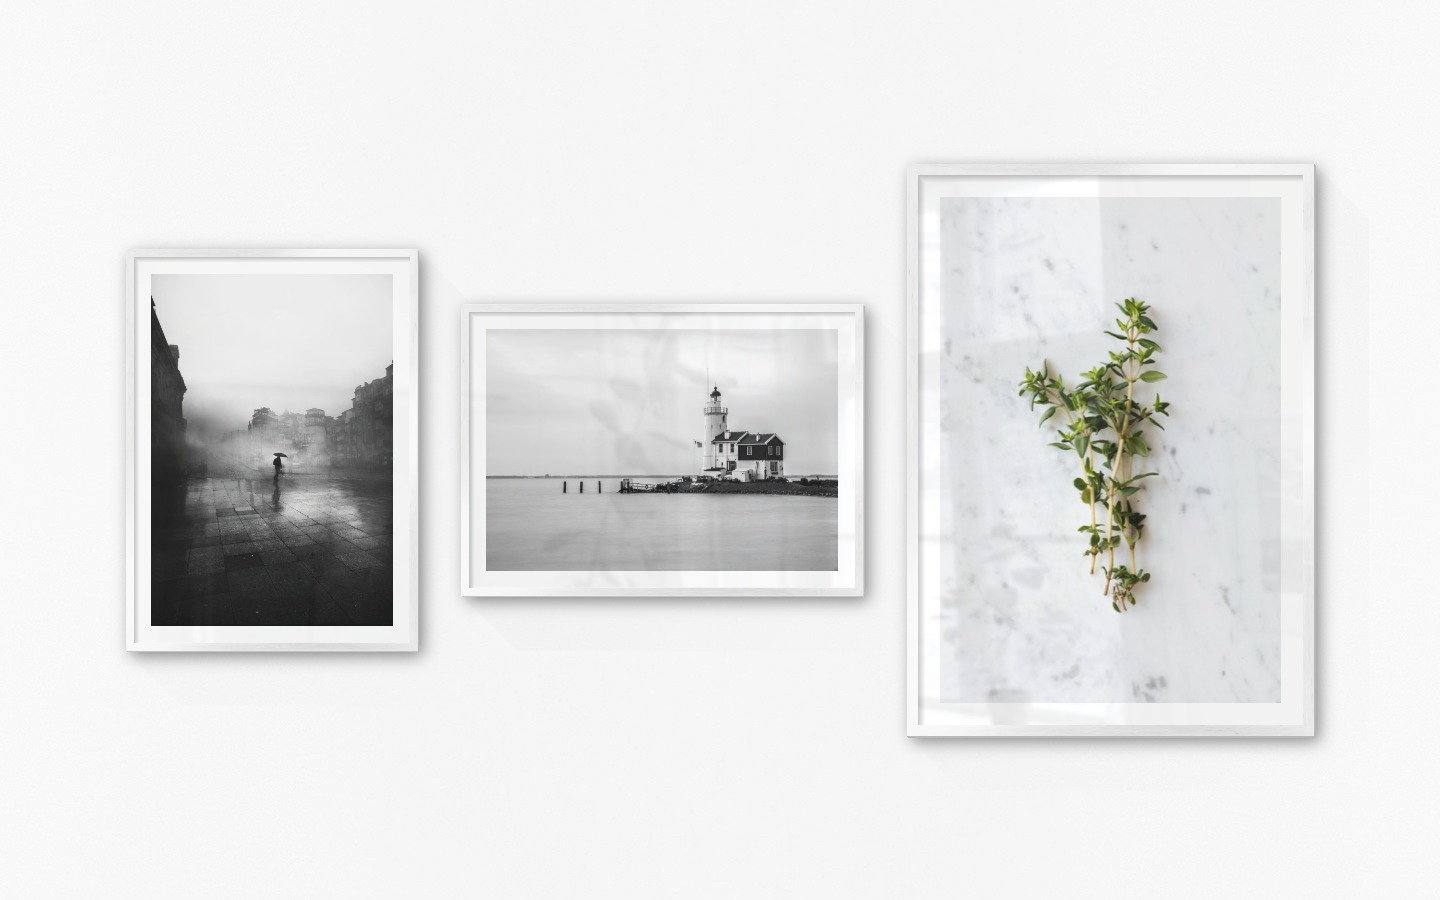 Gallery wall with picture frames in silver in sizes 50x70 and 70x100 with prints "Rainy city", "Pier with building" and "Herbs"